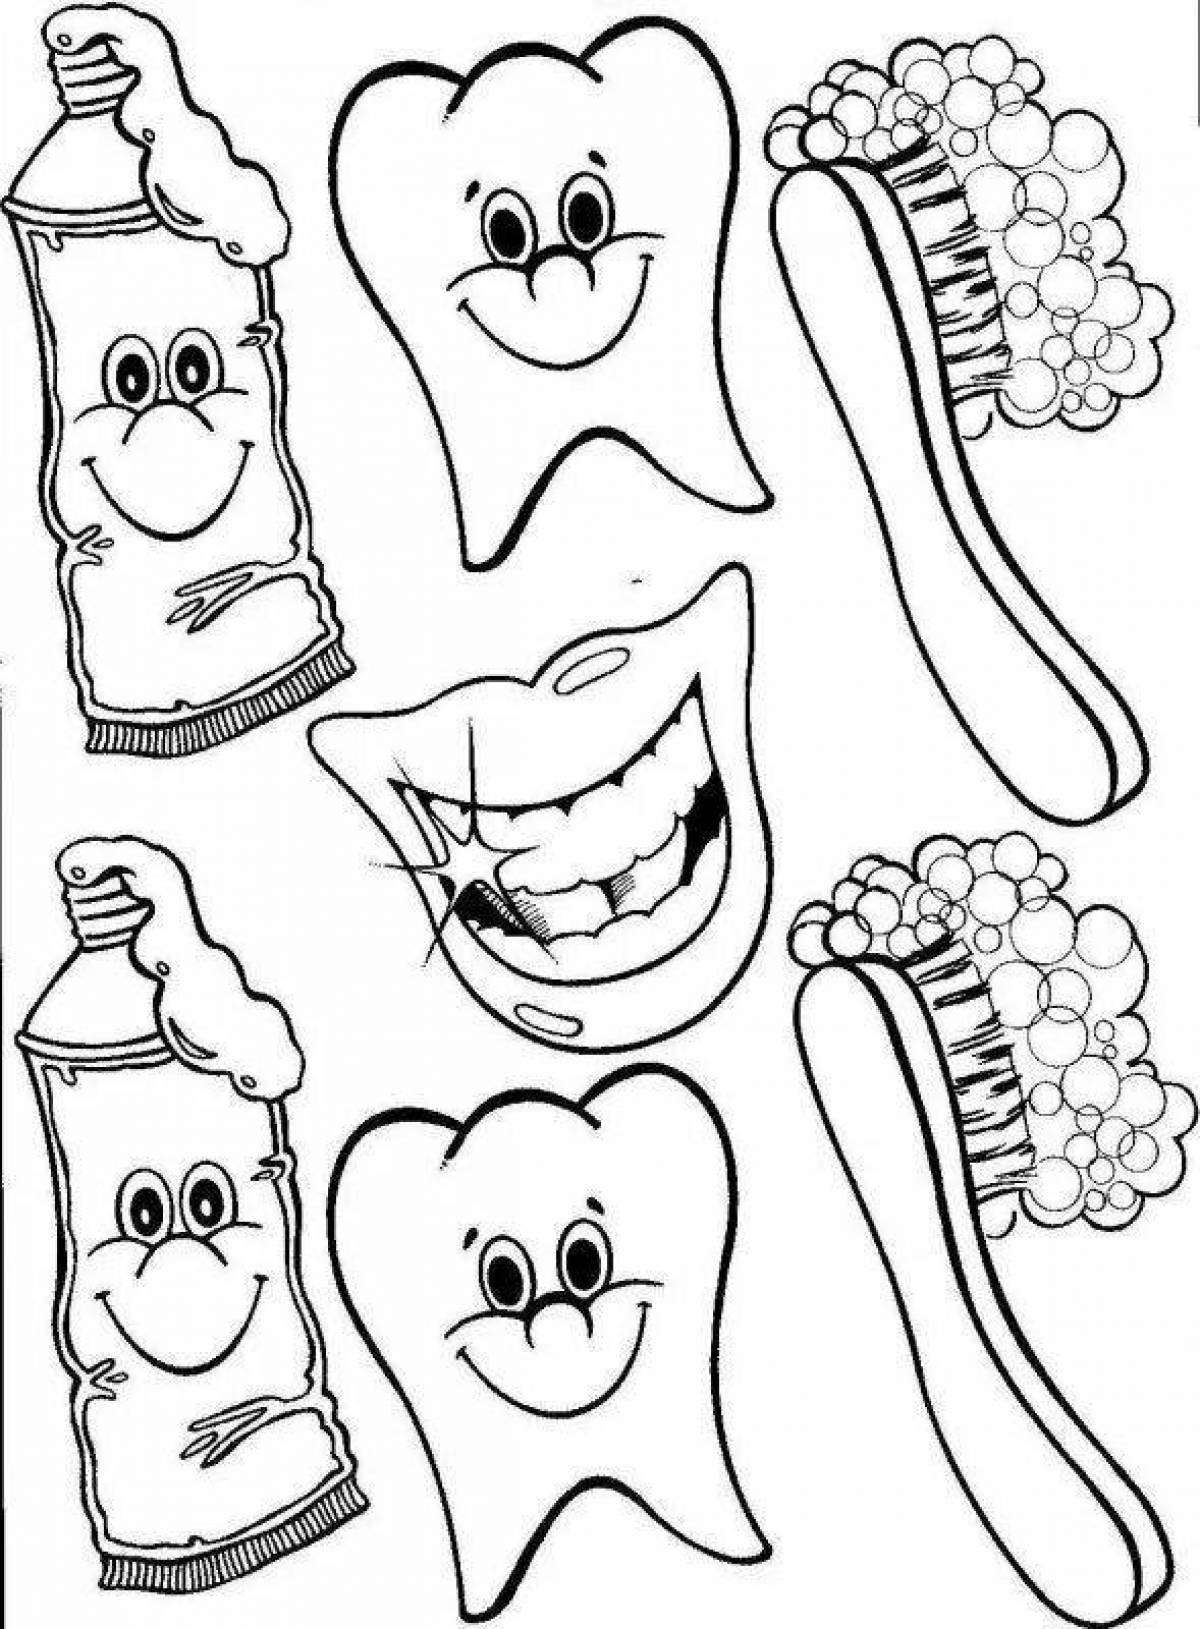 Shiny teeth coloring pages for kids